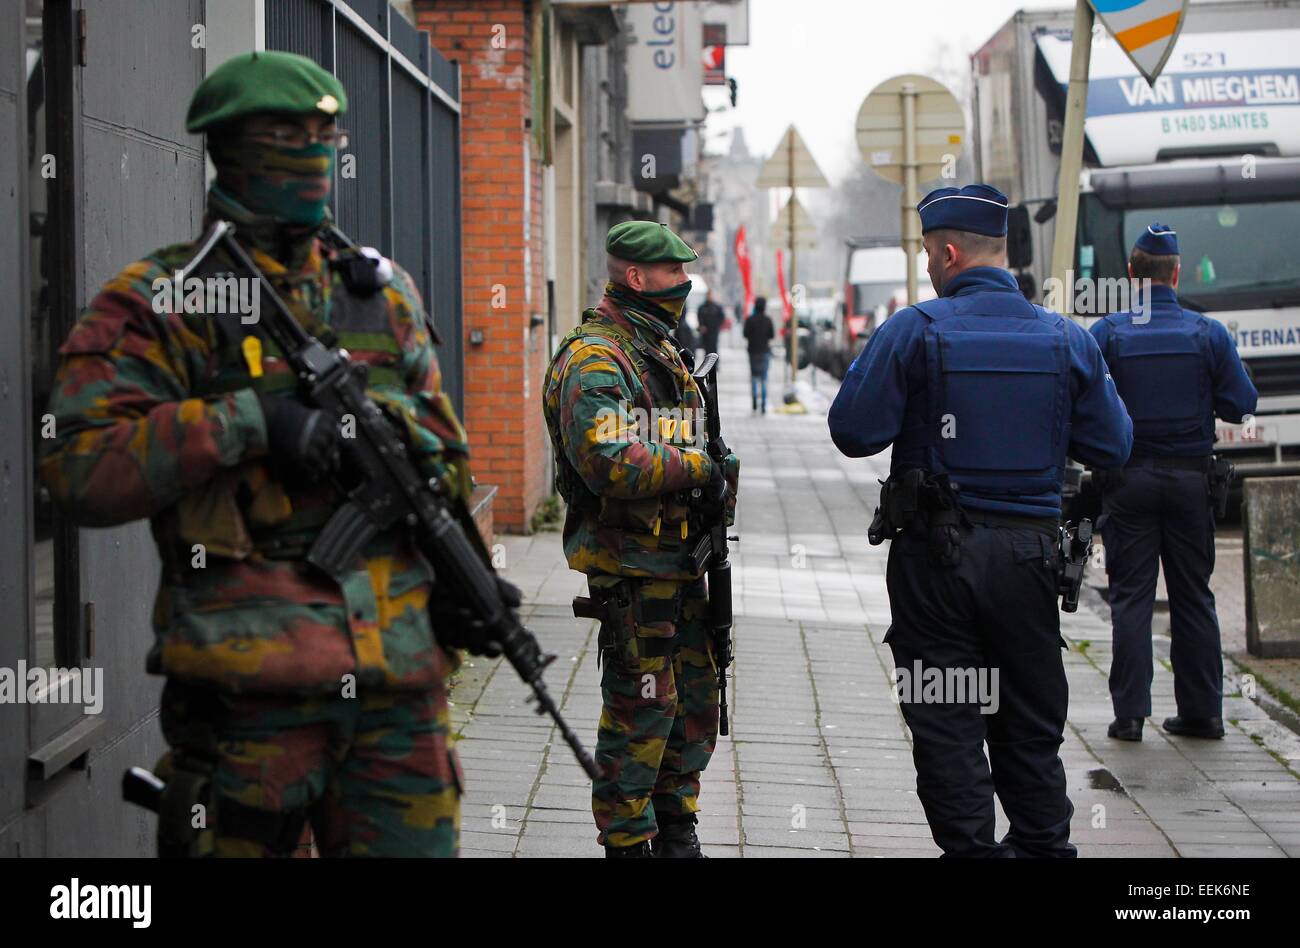 Brussels, Belgium. 19th Jan, 2015. Belgian soldiers and police patrol outside a Jewish school in Brussels, capital of Belgium, on Jan. 19, 2015. Greek police announced on Monday a 33-year-old Algerian national, who was arrested on Sunday in Athens on charges of planning terrorist activity in Belgium, will be deported to Brussels. Two more searches took place in Brussels on Sunday. According to a spokesperson of the Federal prosecutor, no arrests were made. Credit:  Zhou Lei/Xinhua/Alamy Live News Stock Photo